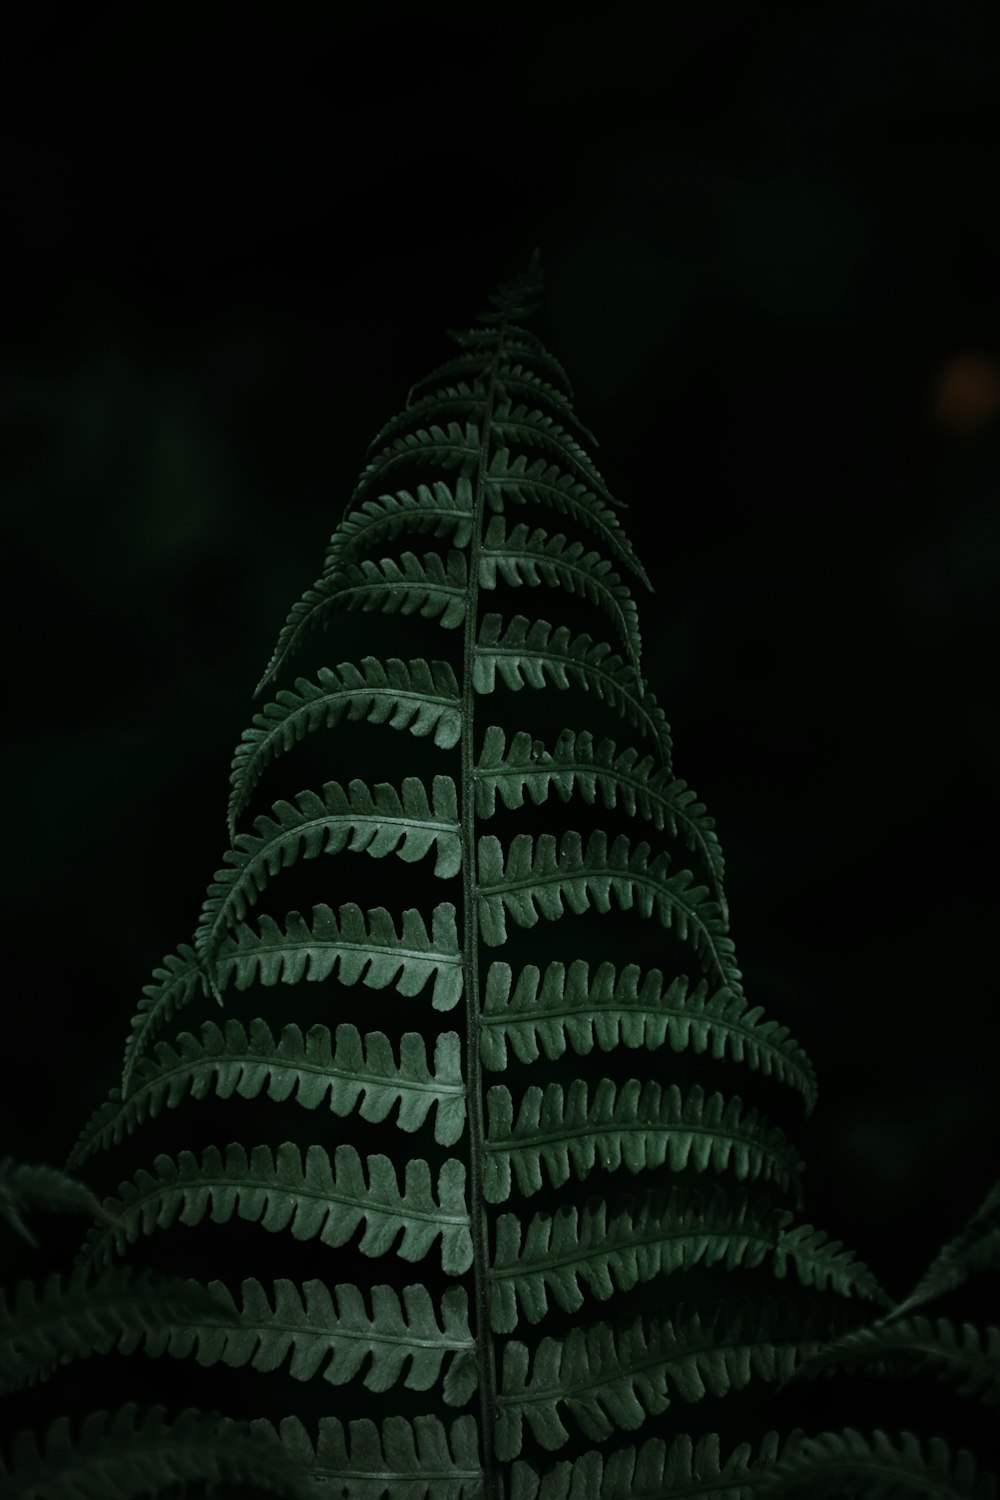 a green plant is shown in the dark